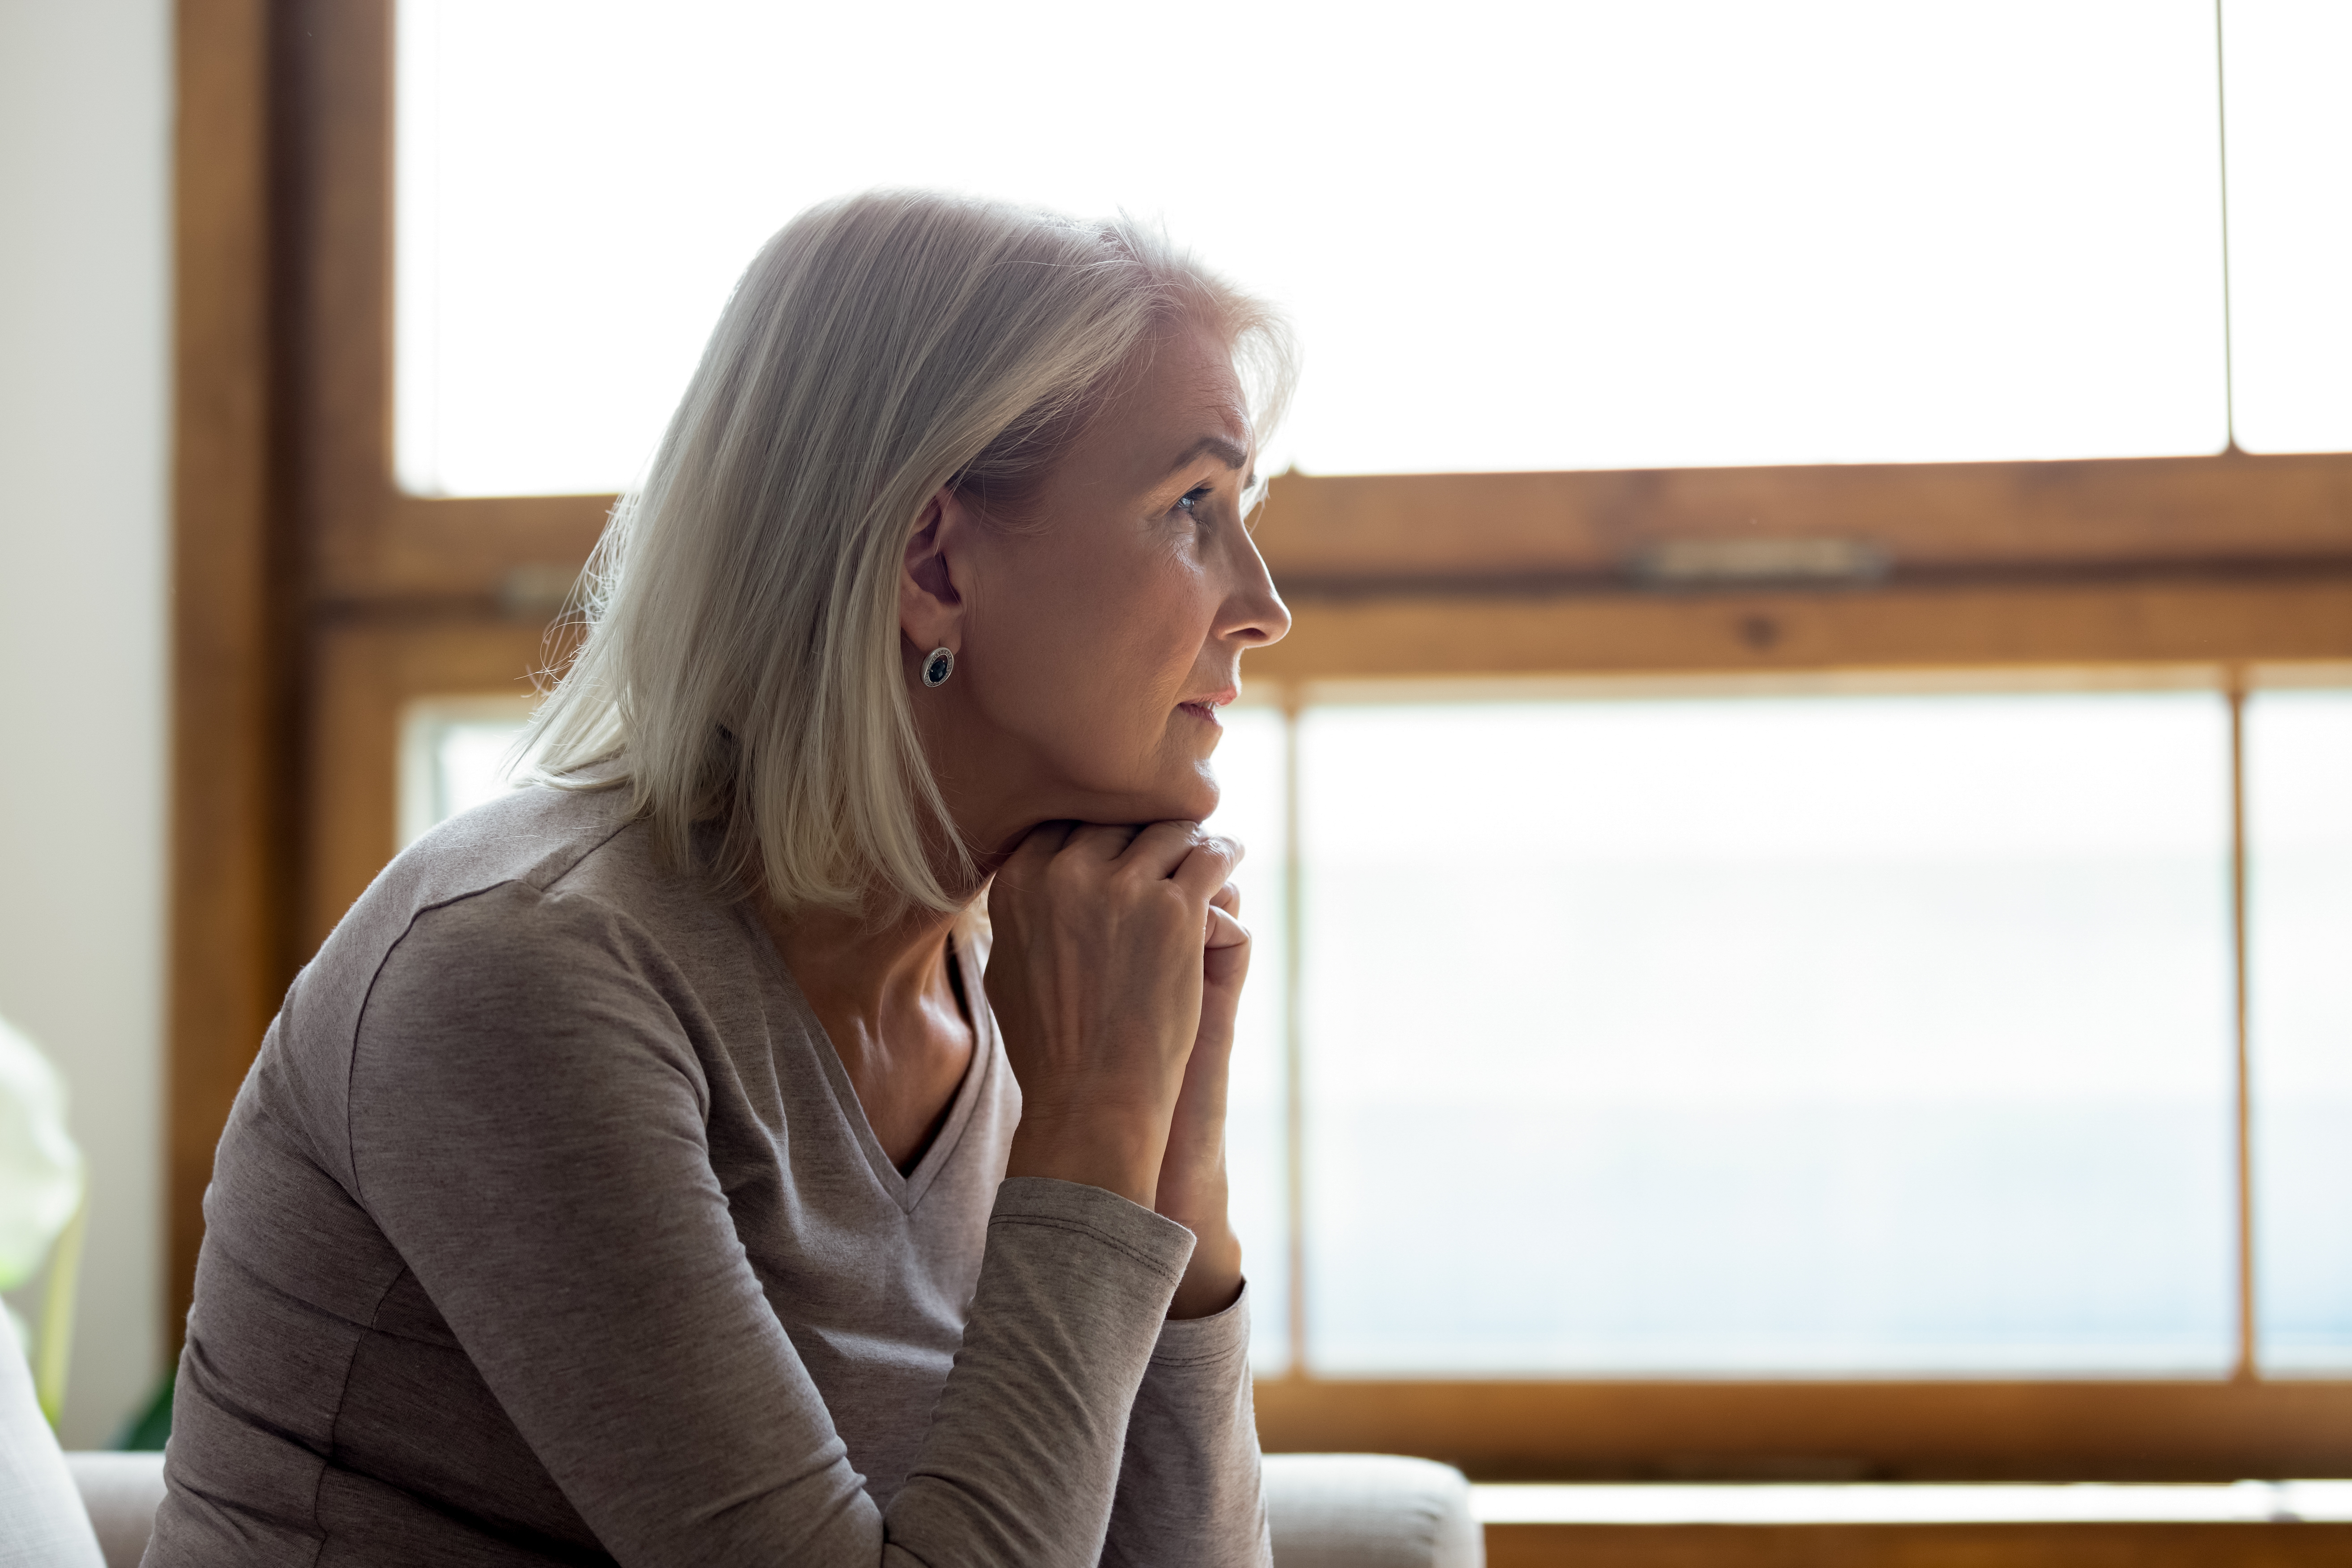 A depressed senior woman pondering over a past event | Source: Shutterstock